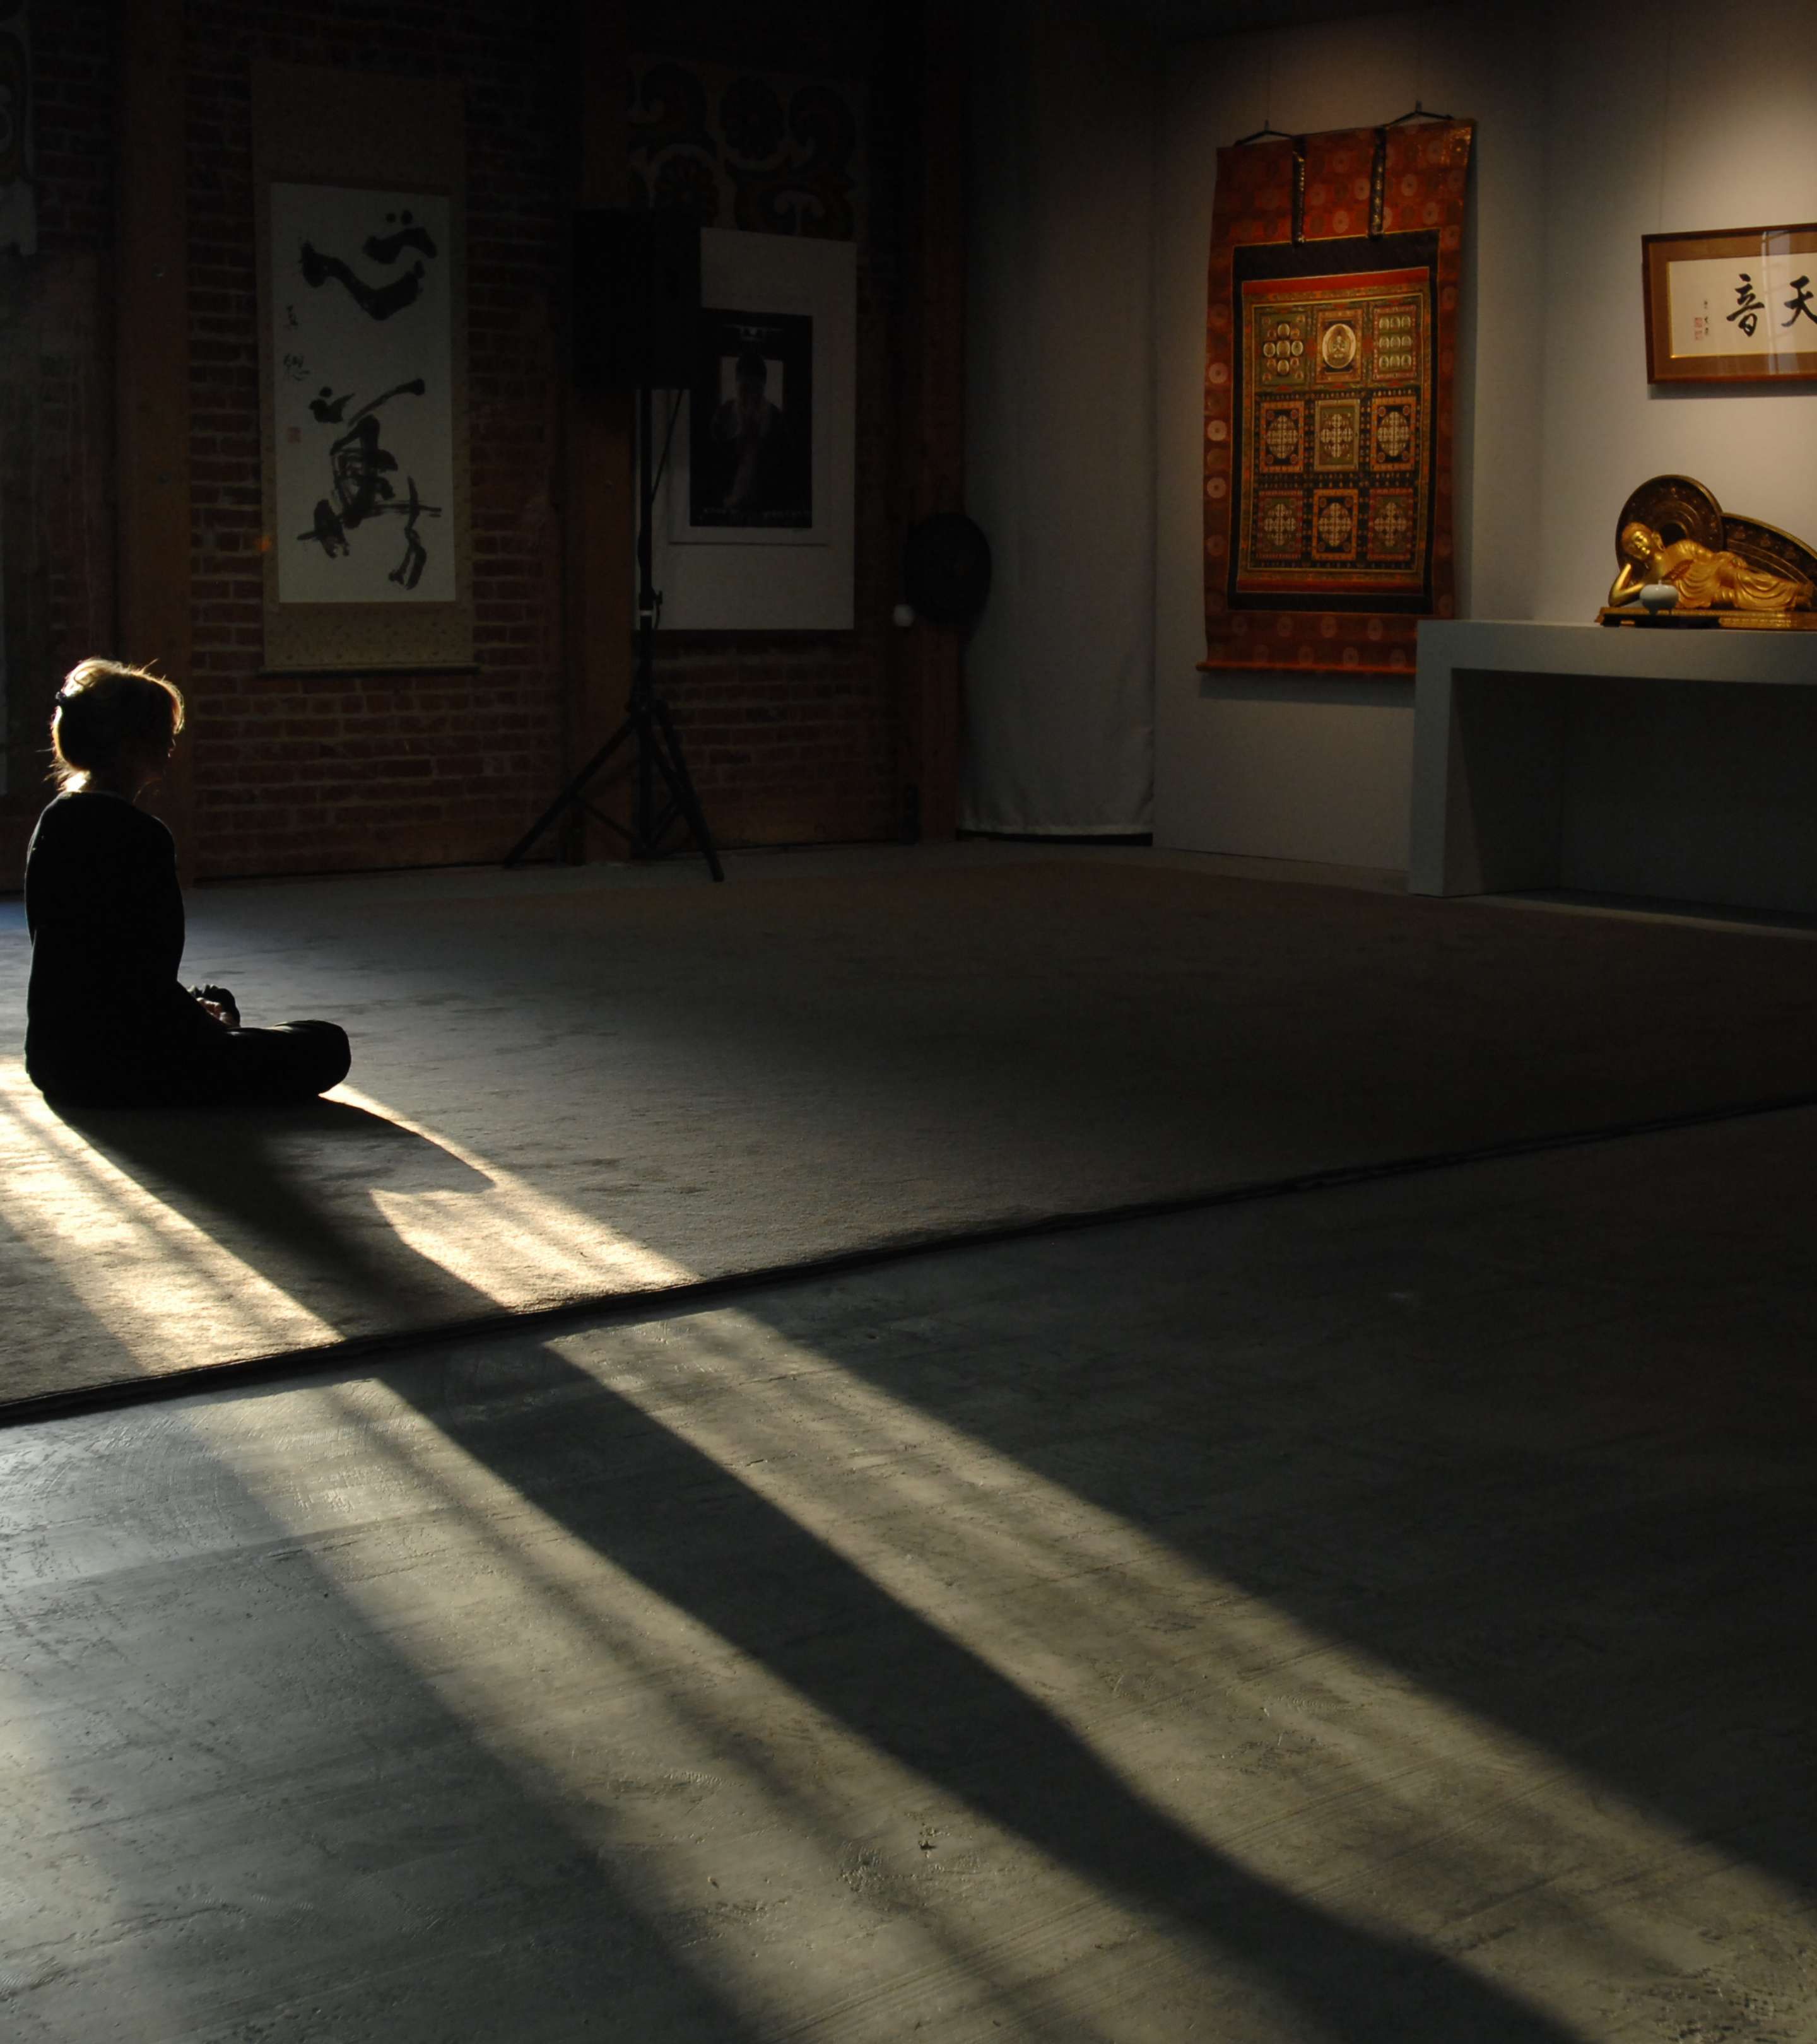 A solitary woman sits in meditative posture in a clean, spacious shrine room; calligraphic scrolls, a hanging painting of a mandala, and Nirvana Buddha statue decorate the space.